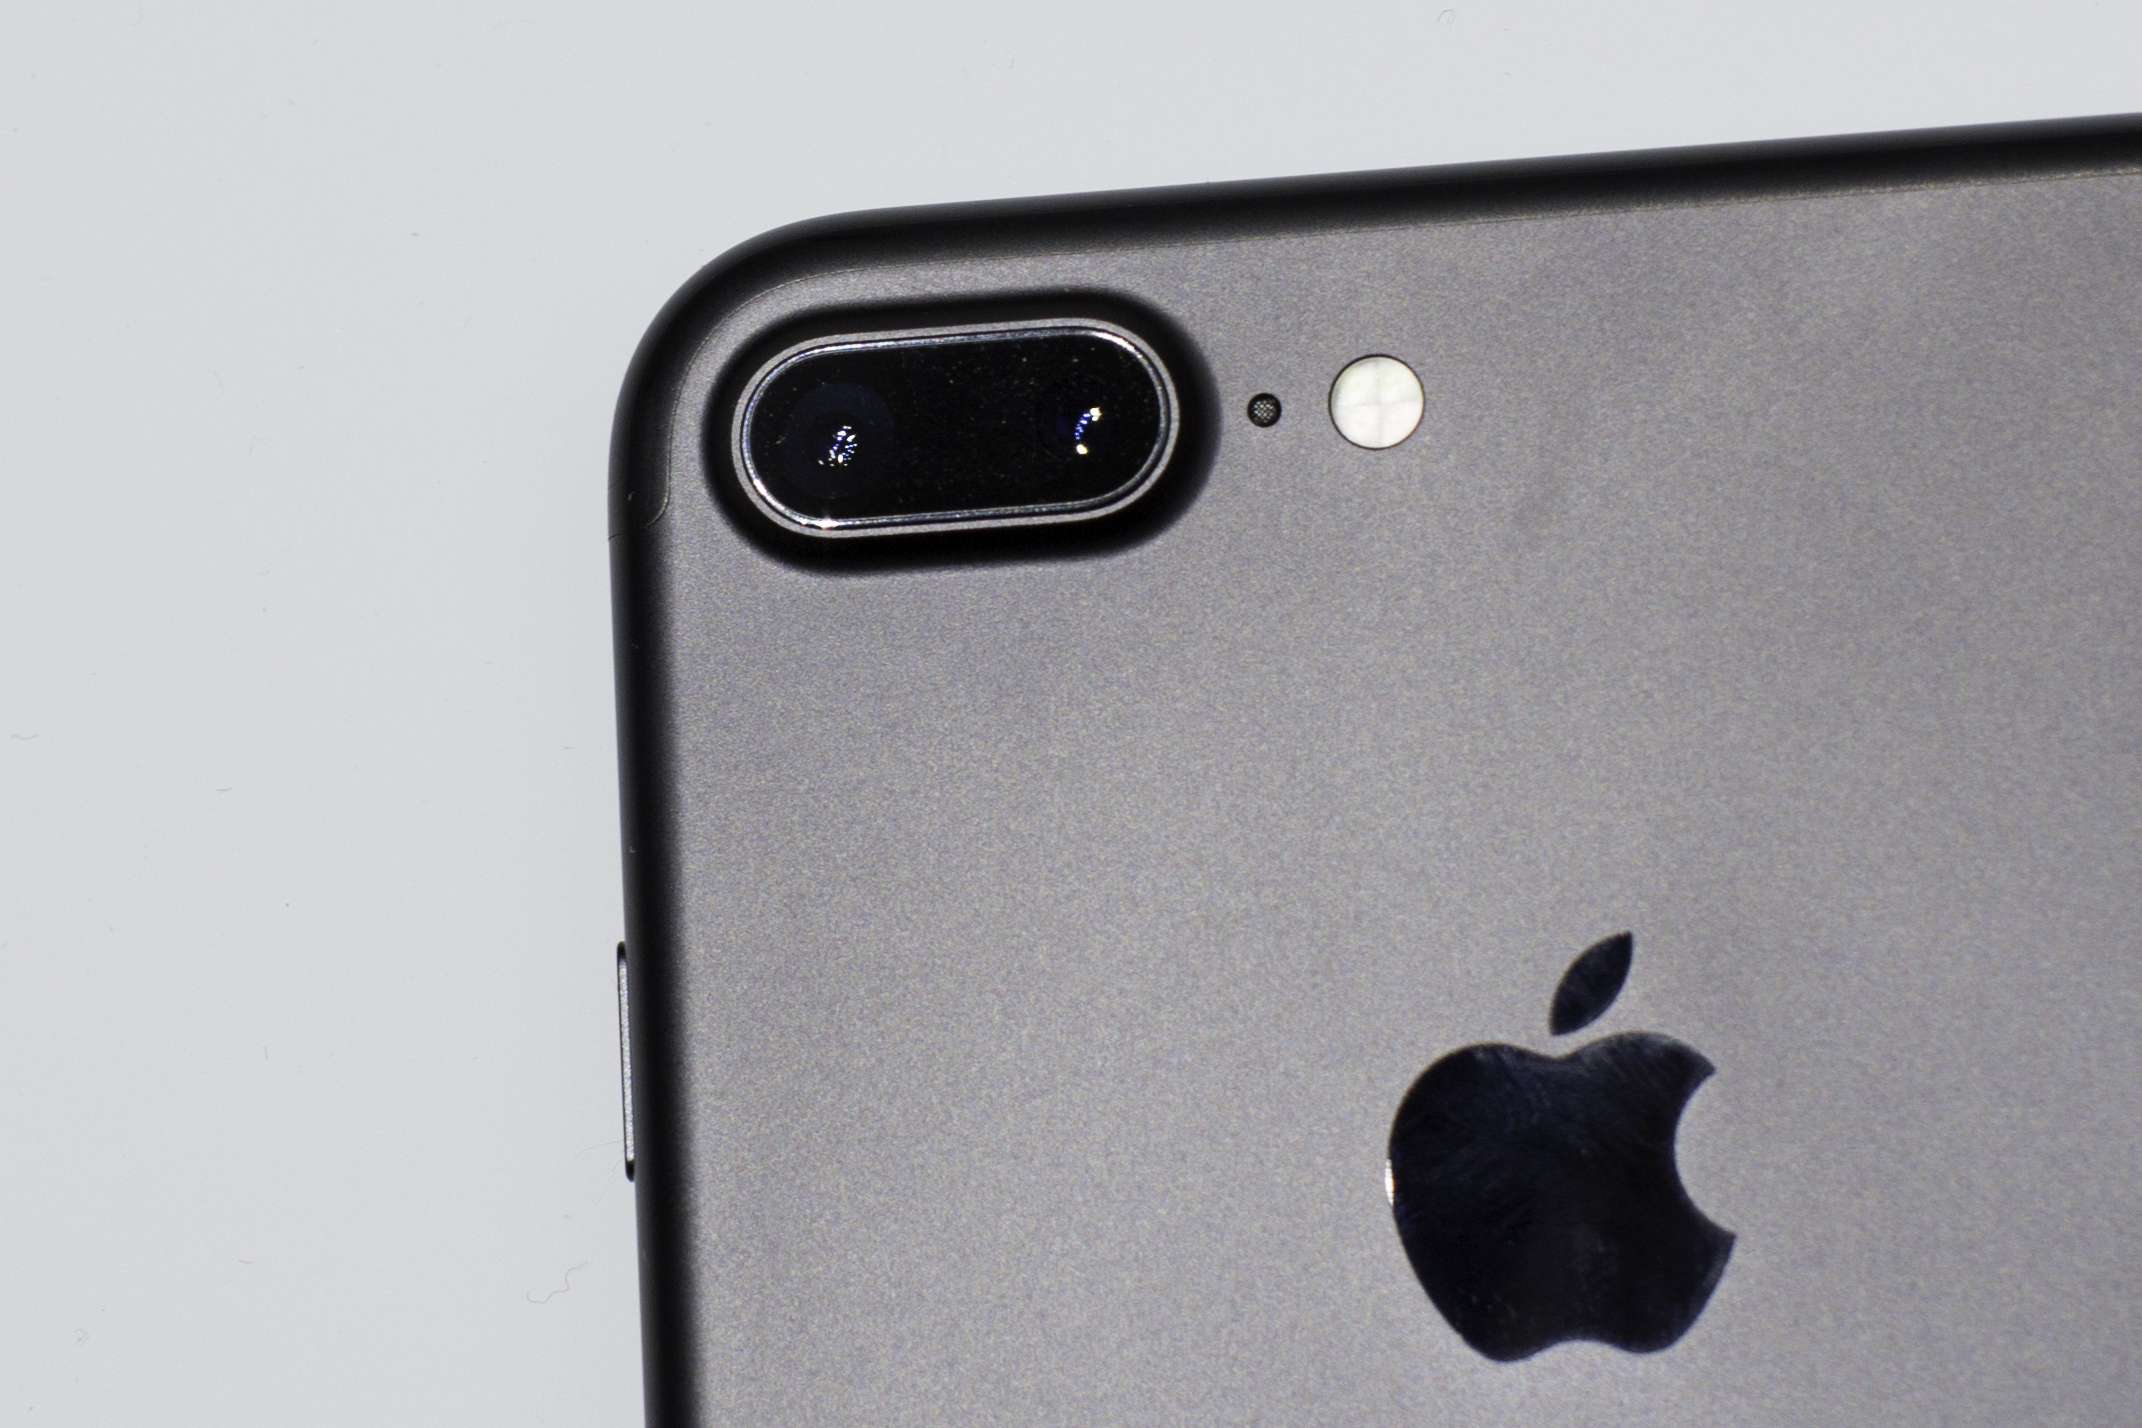 ​The iPhone 7 Plus has dual 12-megapixel cameras on back. With iOS 10, some apps let you shoot with a 